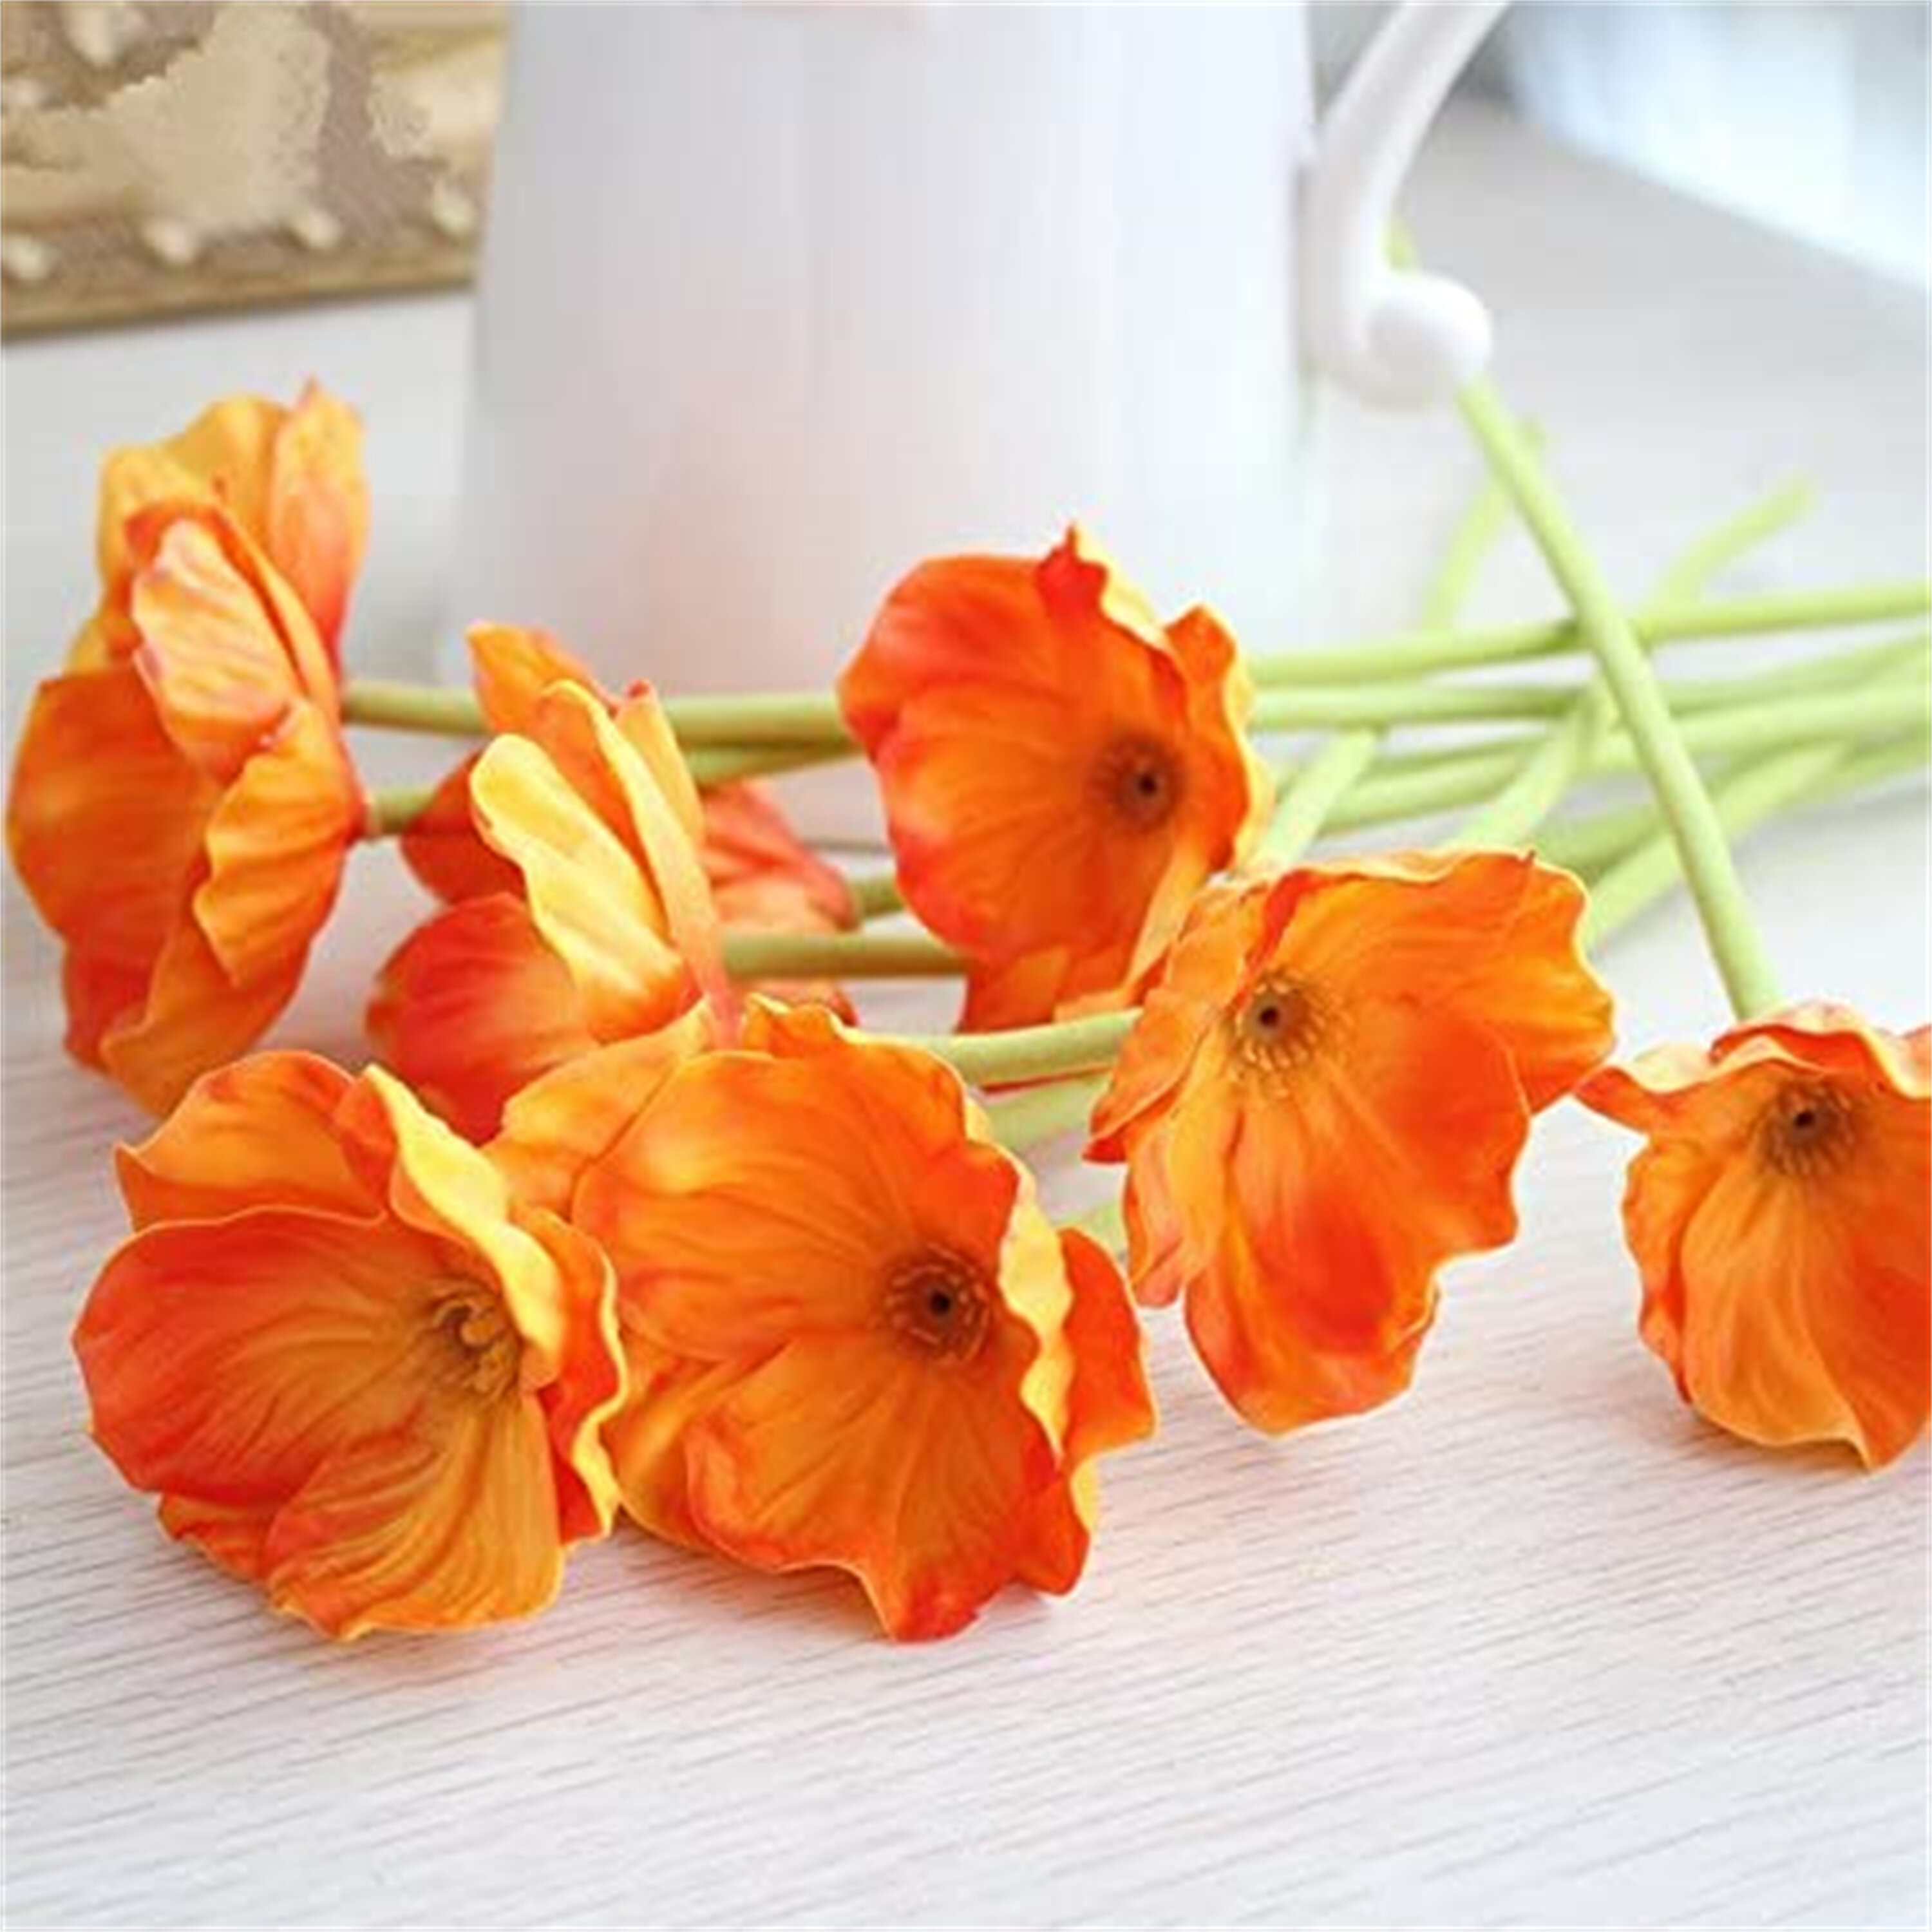 10 PCS Latex Corn Poppies Decorative Silk Fake Artificial Poppy Flowers for Wedding Holiday Bridal Bouquet Home Party Decor Bridesmaid Bouquets